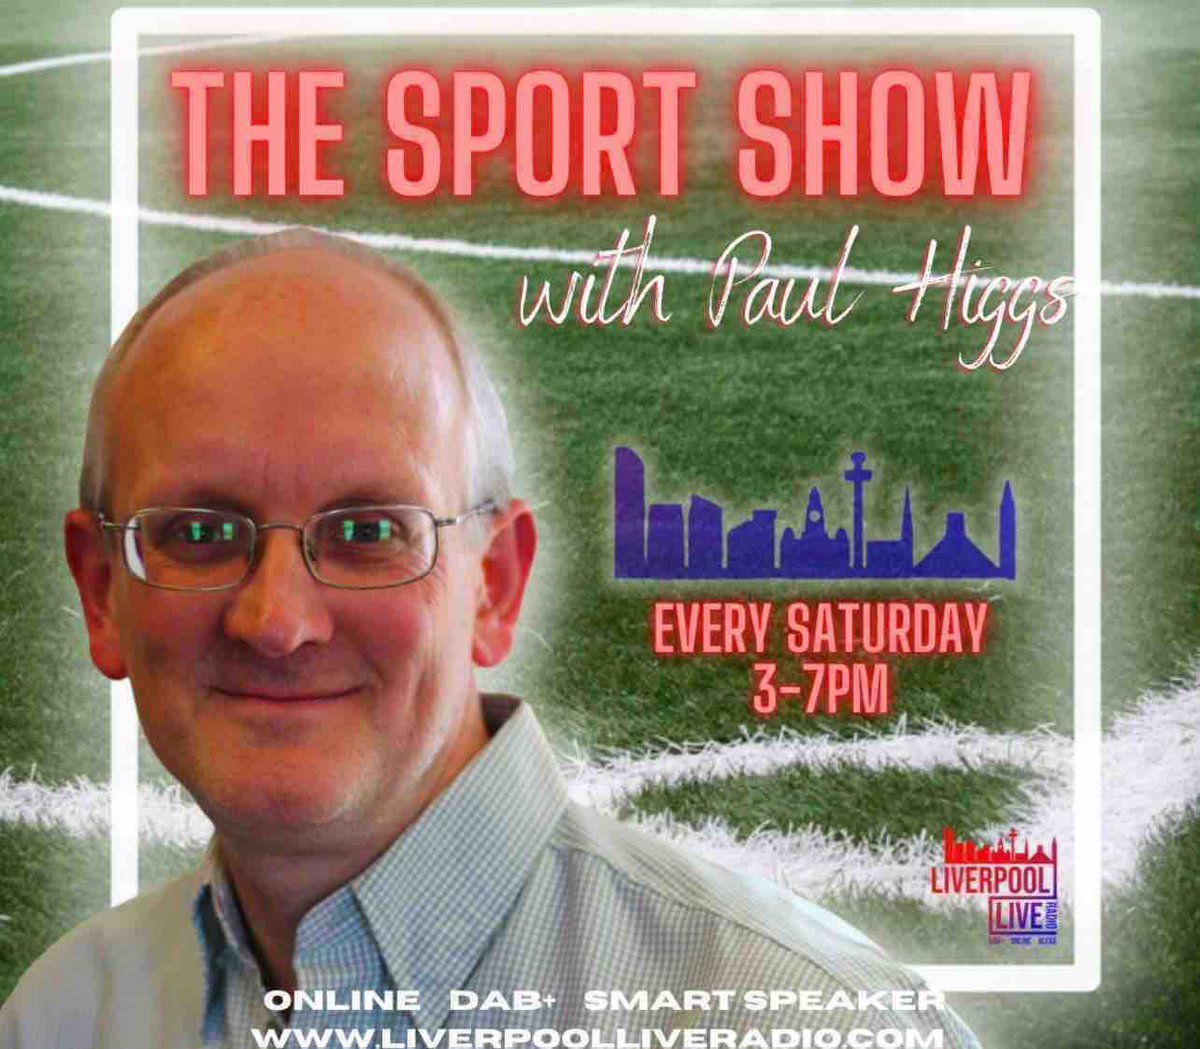 Liverpool Live Sport returns with @PaulHiggsRadio at 3pm and the latest sporting news. It’s the FA Cup Final at Wembley - Man Utd vs Man City. Plus, we discuss the latest from both #EFC and #LFC. Elsewhere, rugby’s league Super League nears the halfway point of the season.